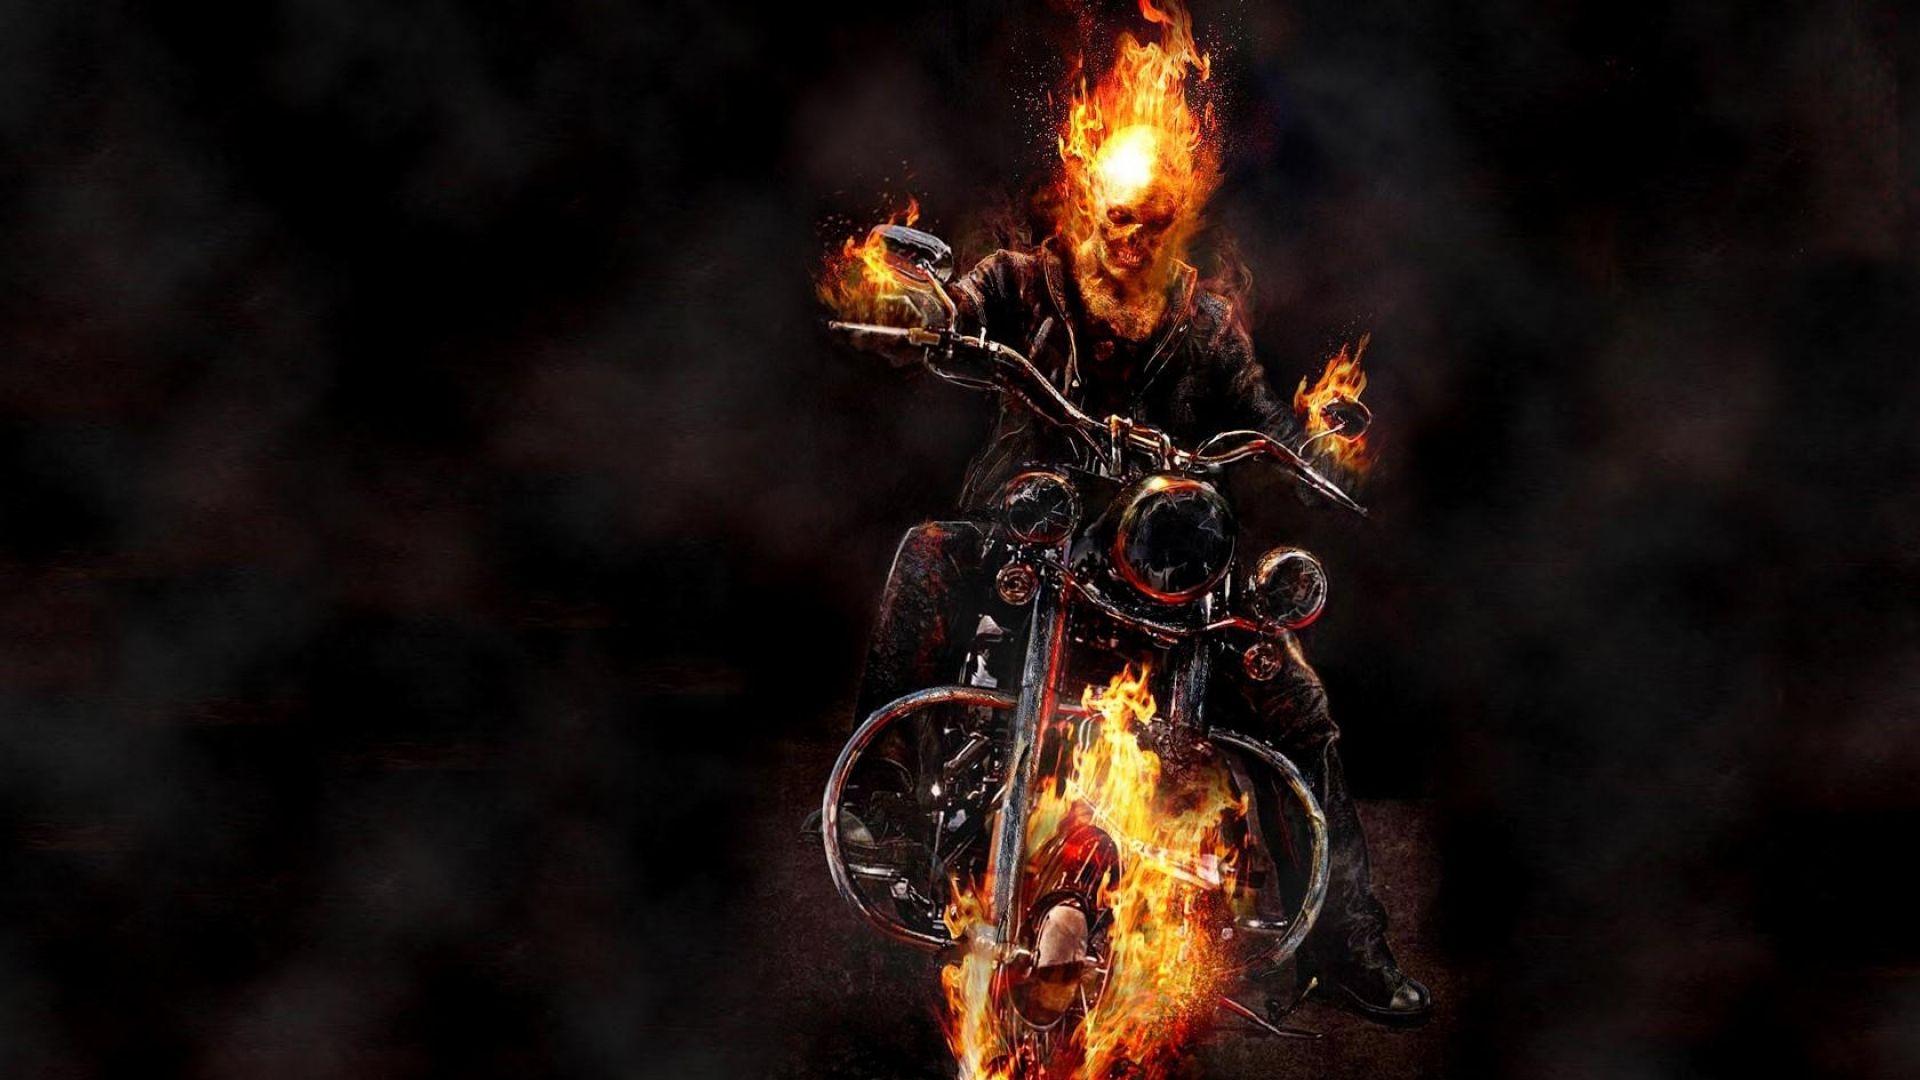 Motorcycle Ghost Rider Image HD Wallpaper